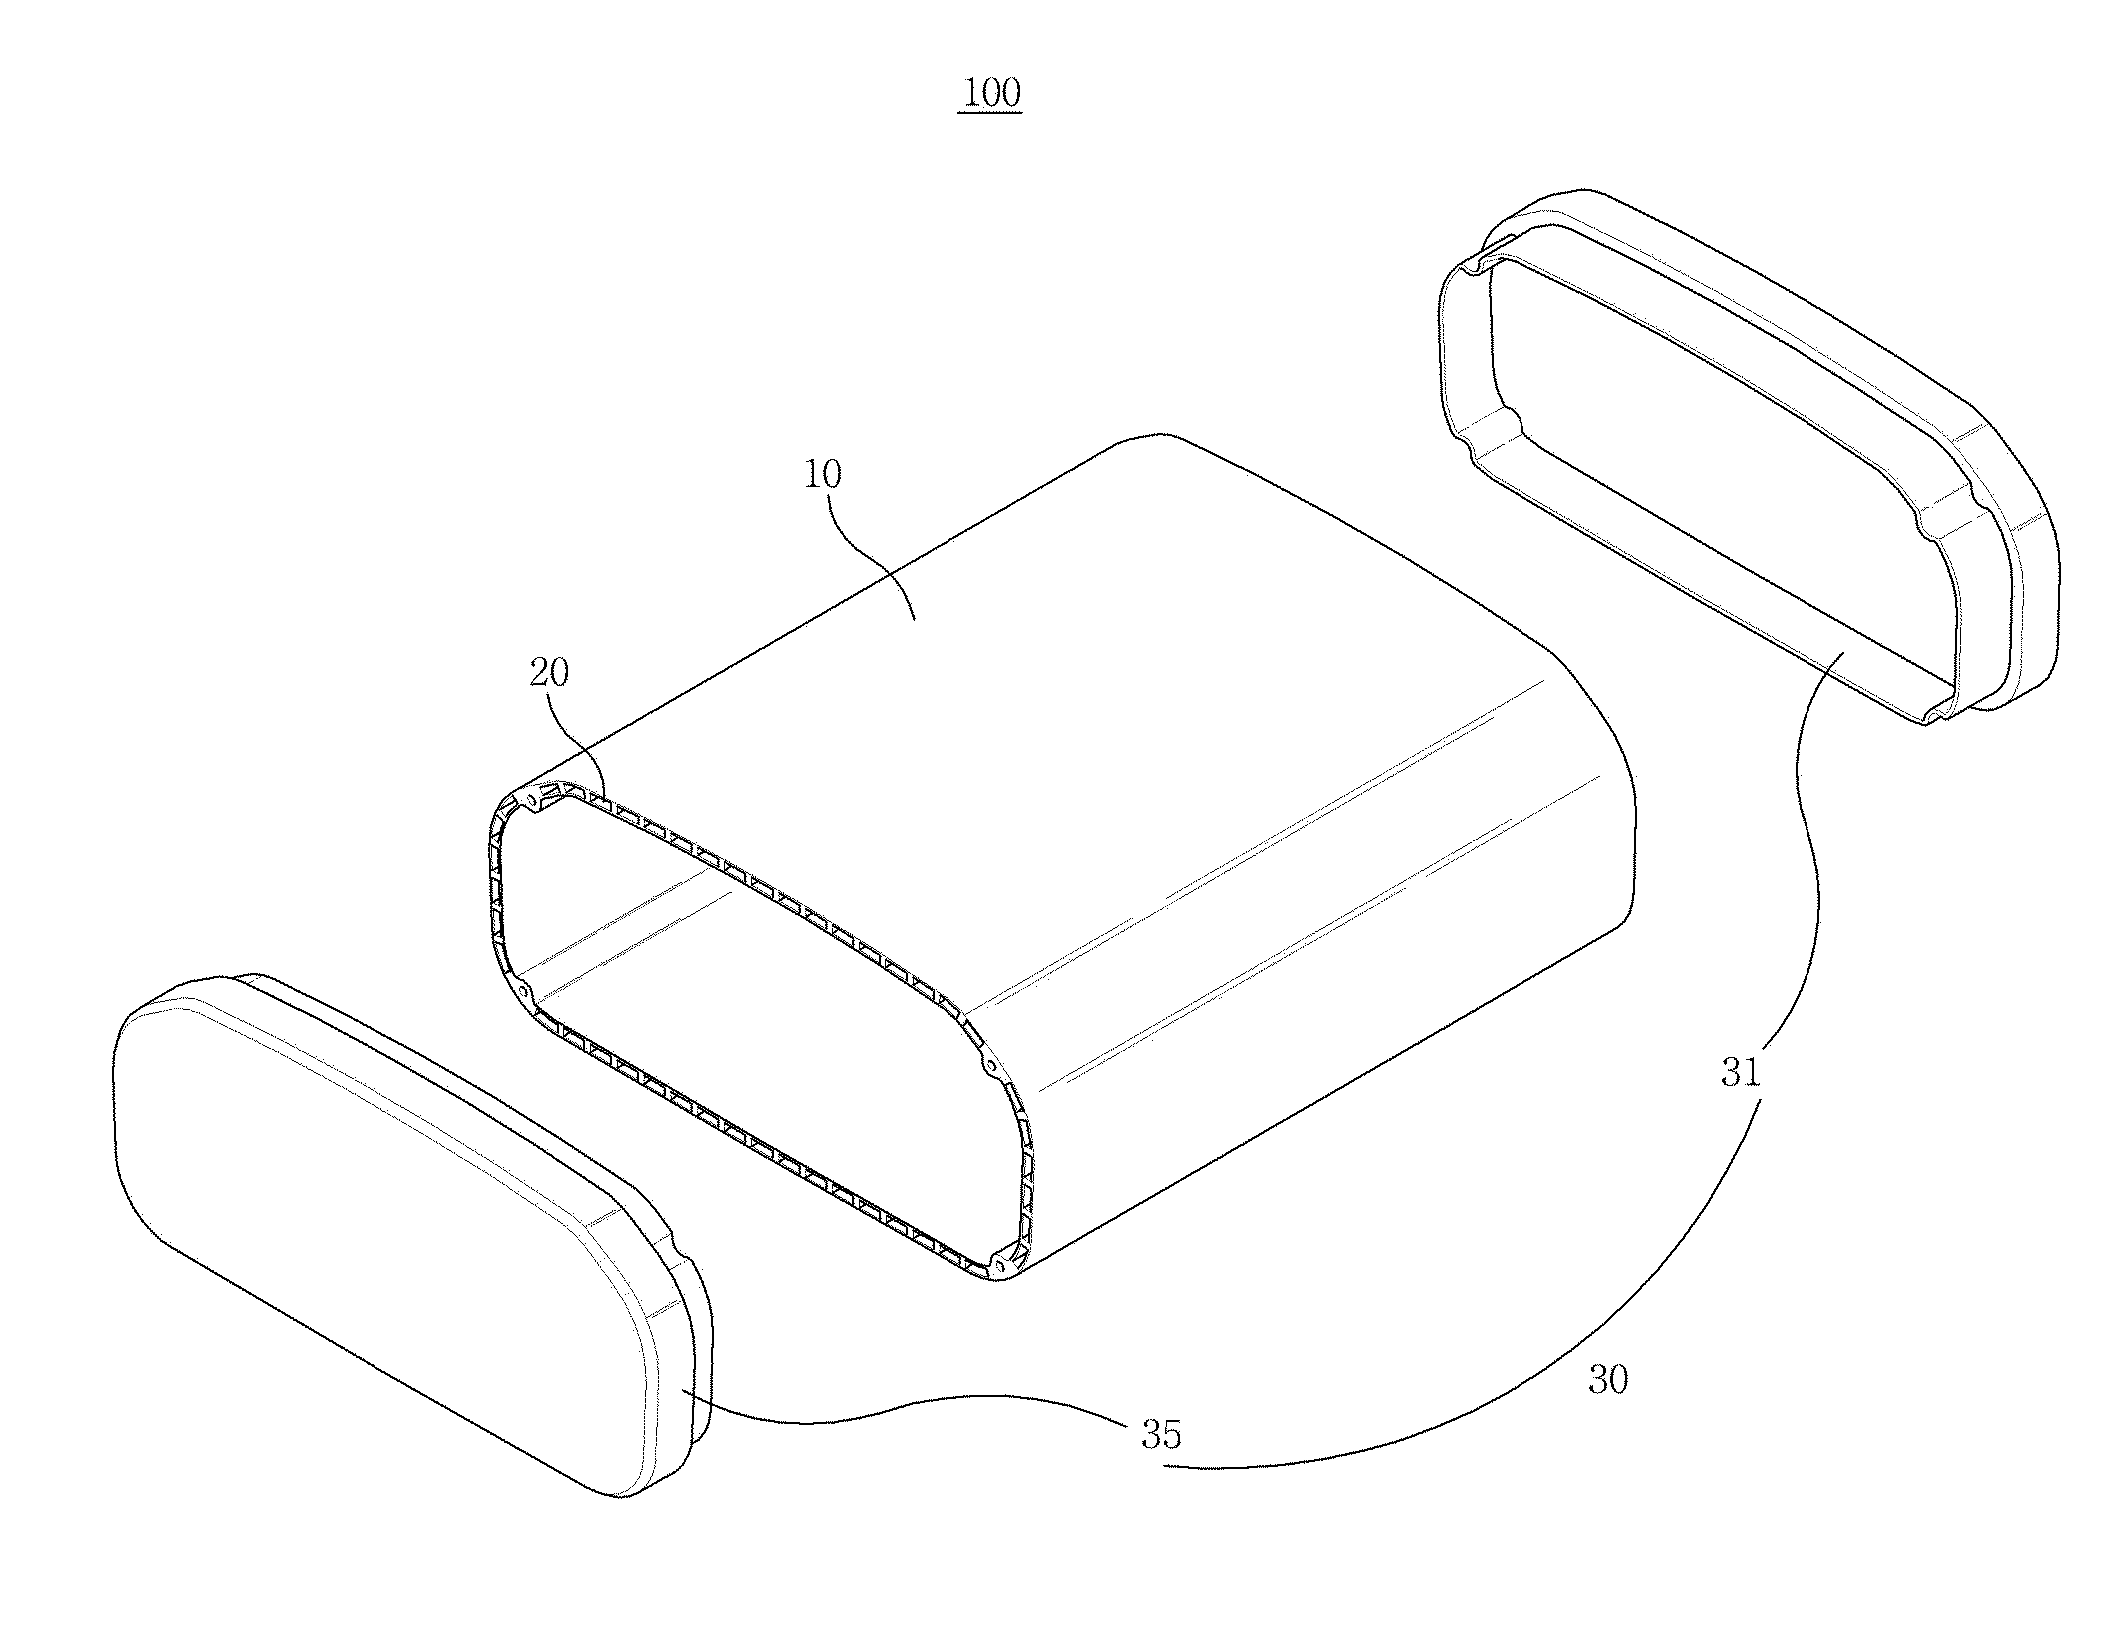 Antenna case of air-hole structure